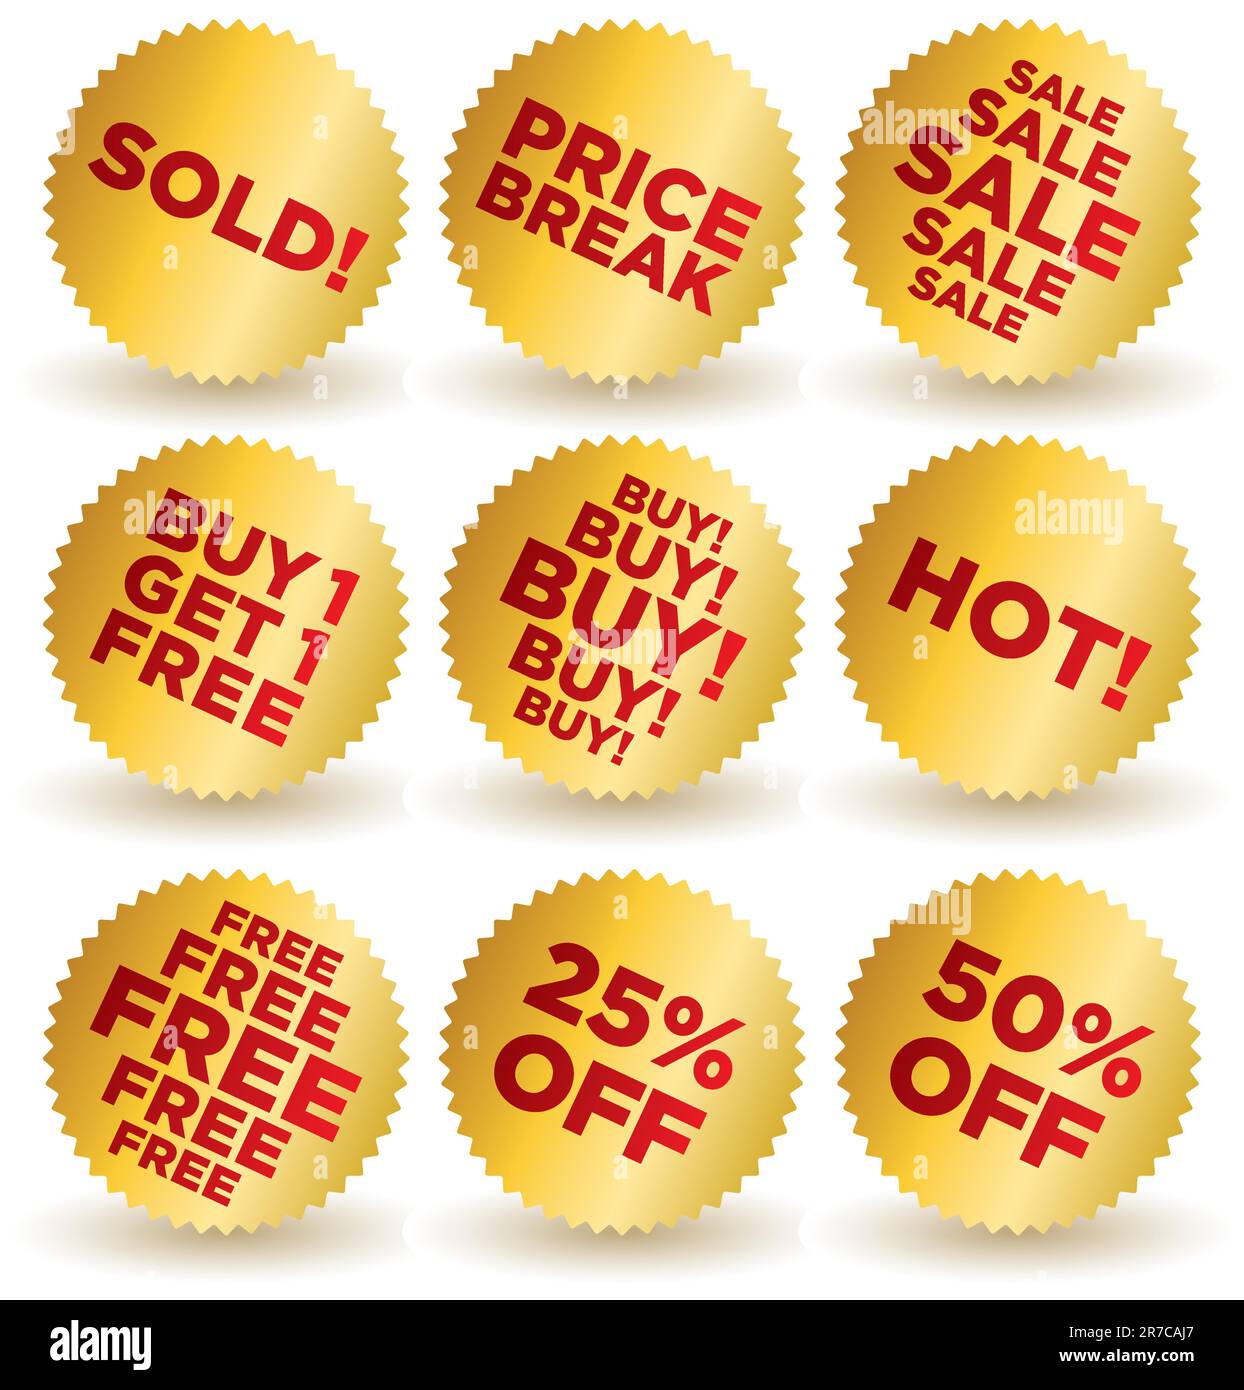 Vector illustration set of stylish glossy round stickers in gold and red for retail and other use: Sold, Price Break, Sale, Buy 1 Get 1 Free, Buy, ... Stock Vector